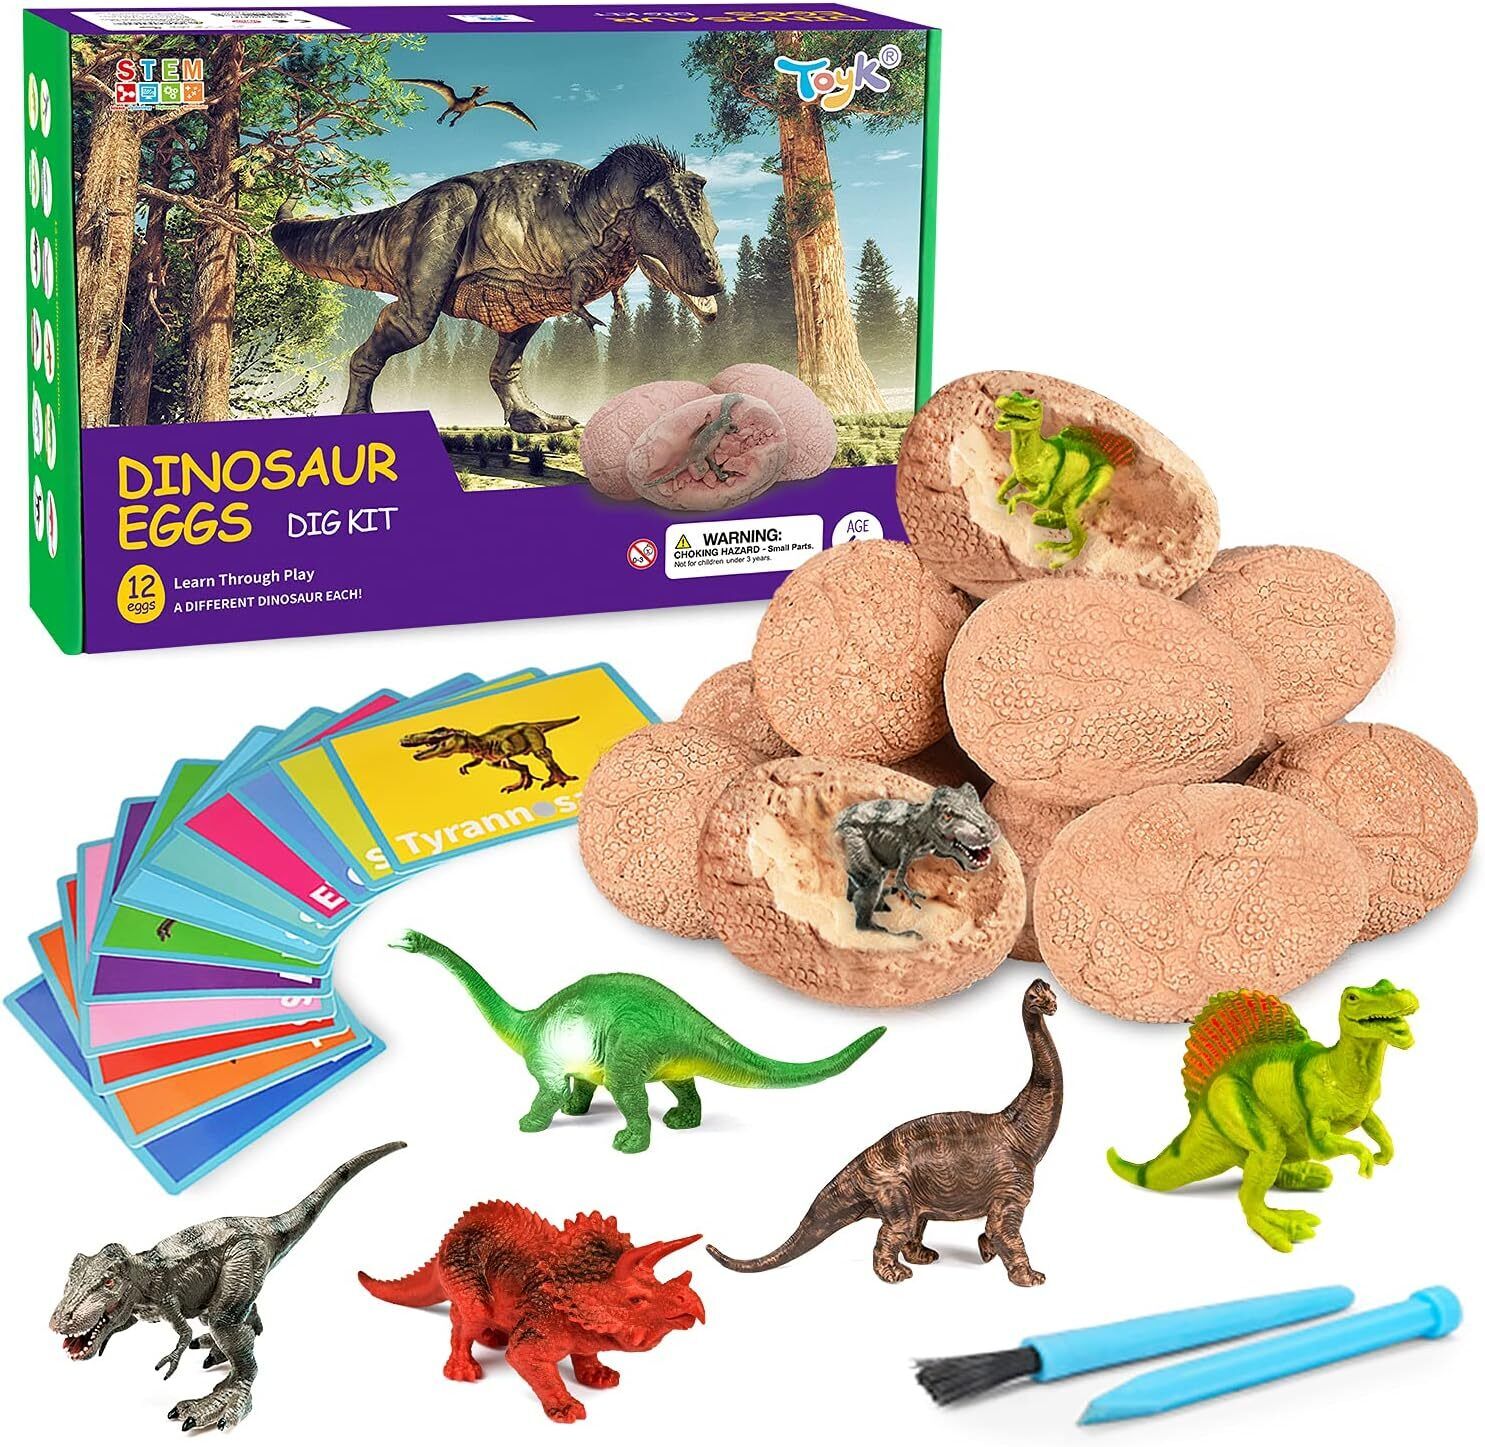 Dig Up Dinosaur Fossil Eggs, Break Open 12 Unique Eggs and Discover 12 Cute